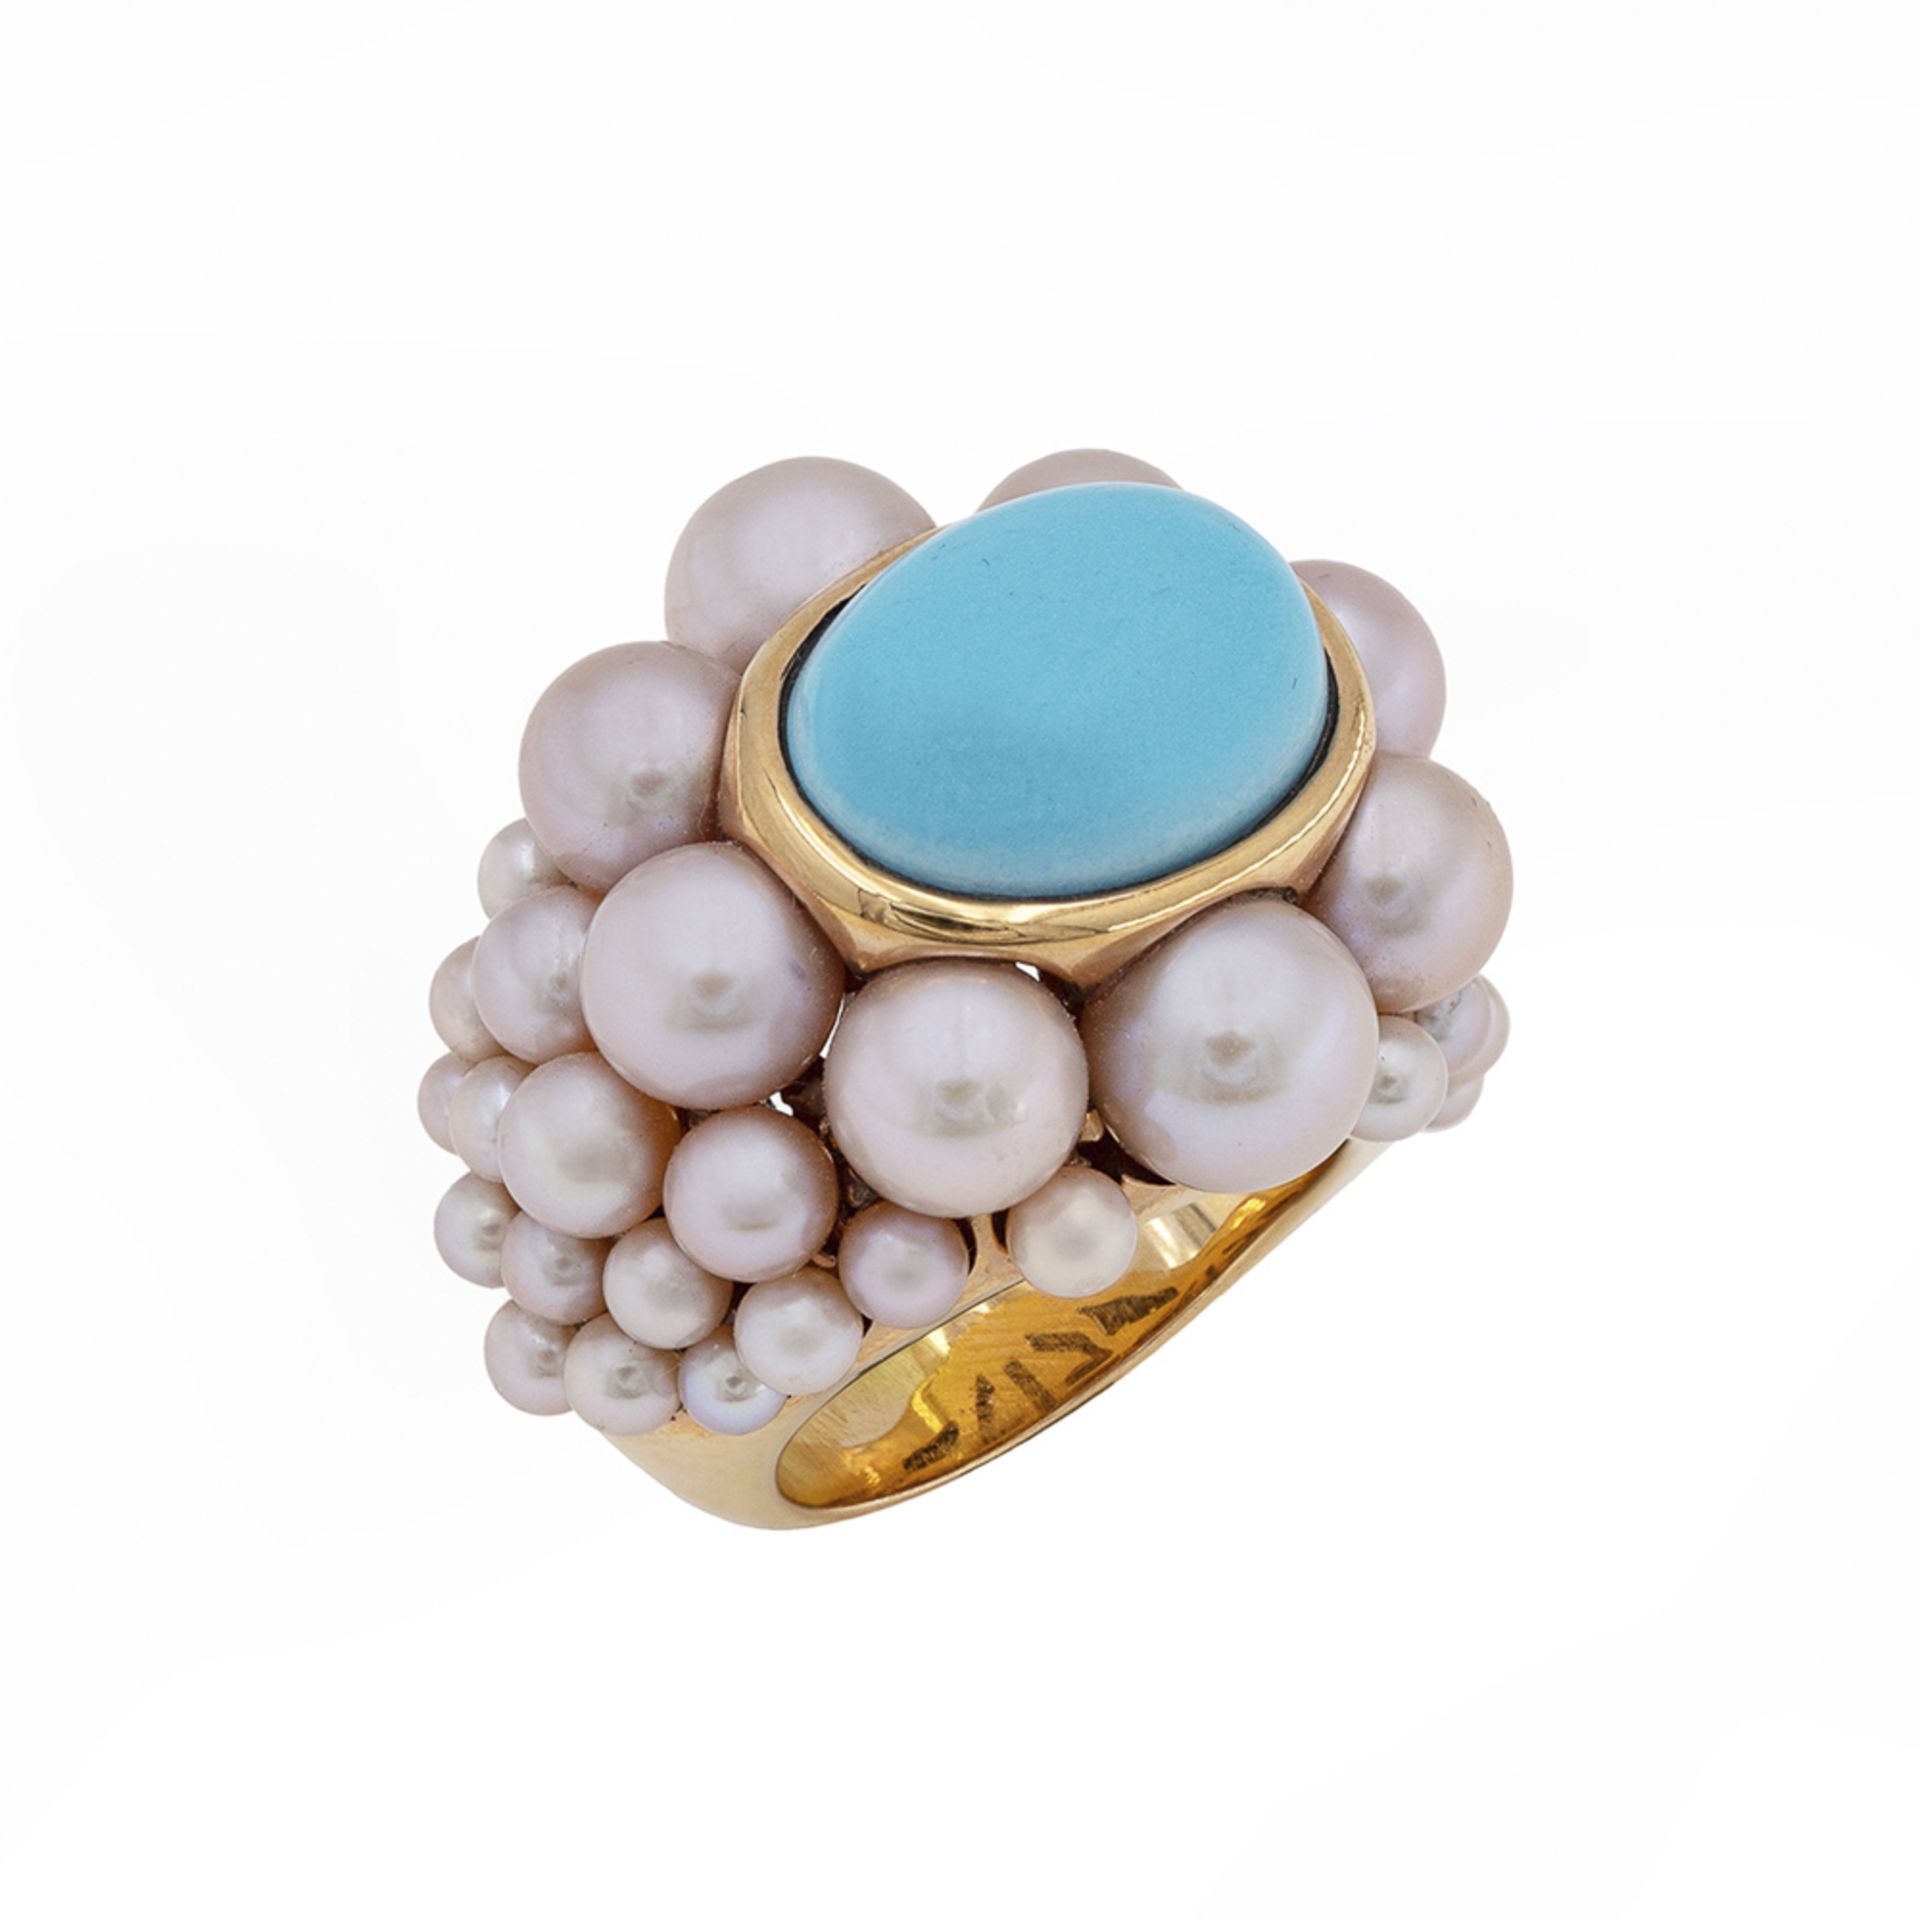 Mimi 18kt yellow gold, turquoise and pink pearls cocktail ring